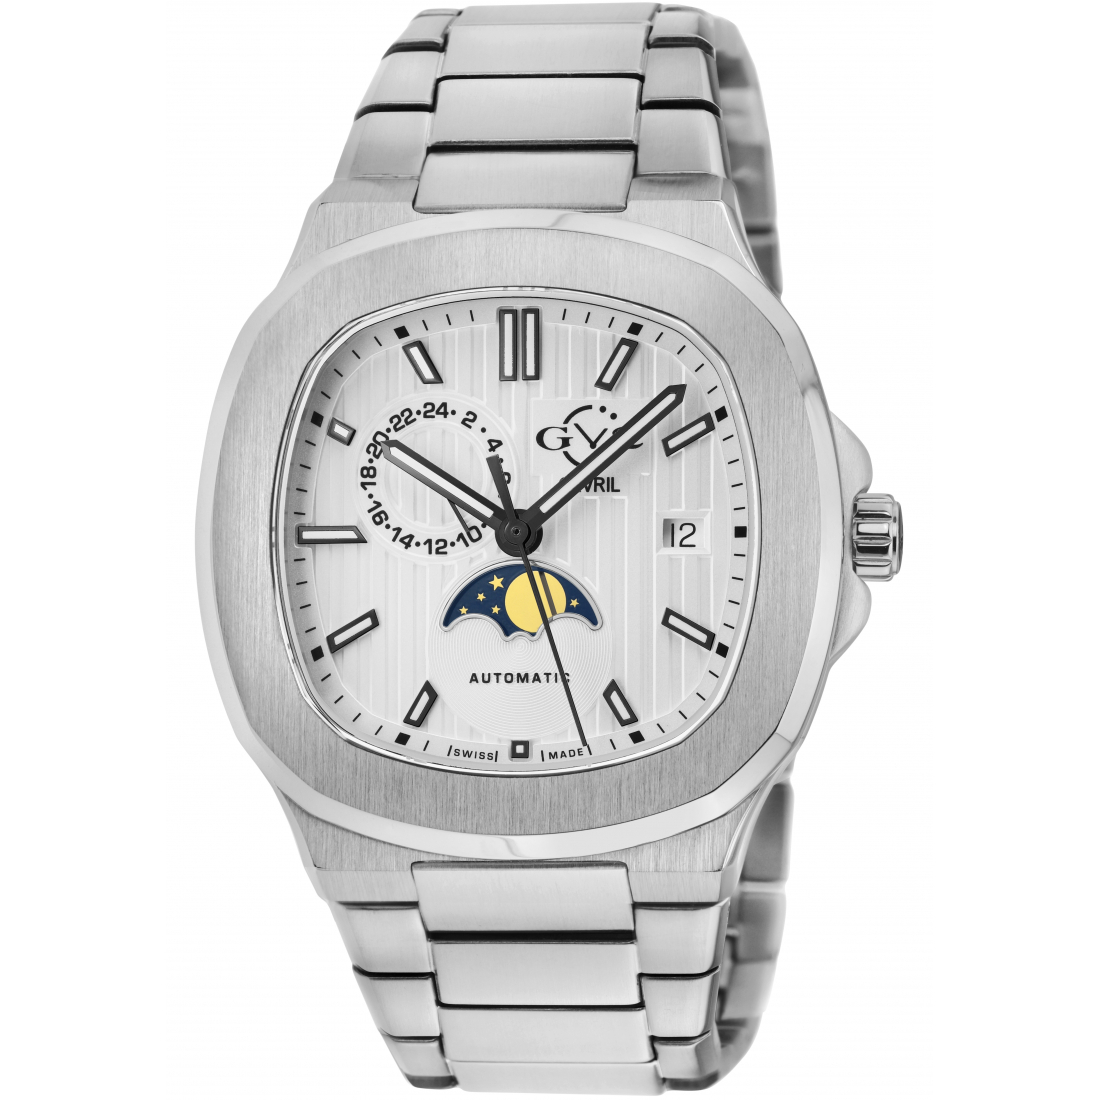 GV2 Men's Potente Moon Phase Swiss Automatic Watch,316L Stainless Steel Case, Silver Dial, 316L Stainless Steel  Bracelet